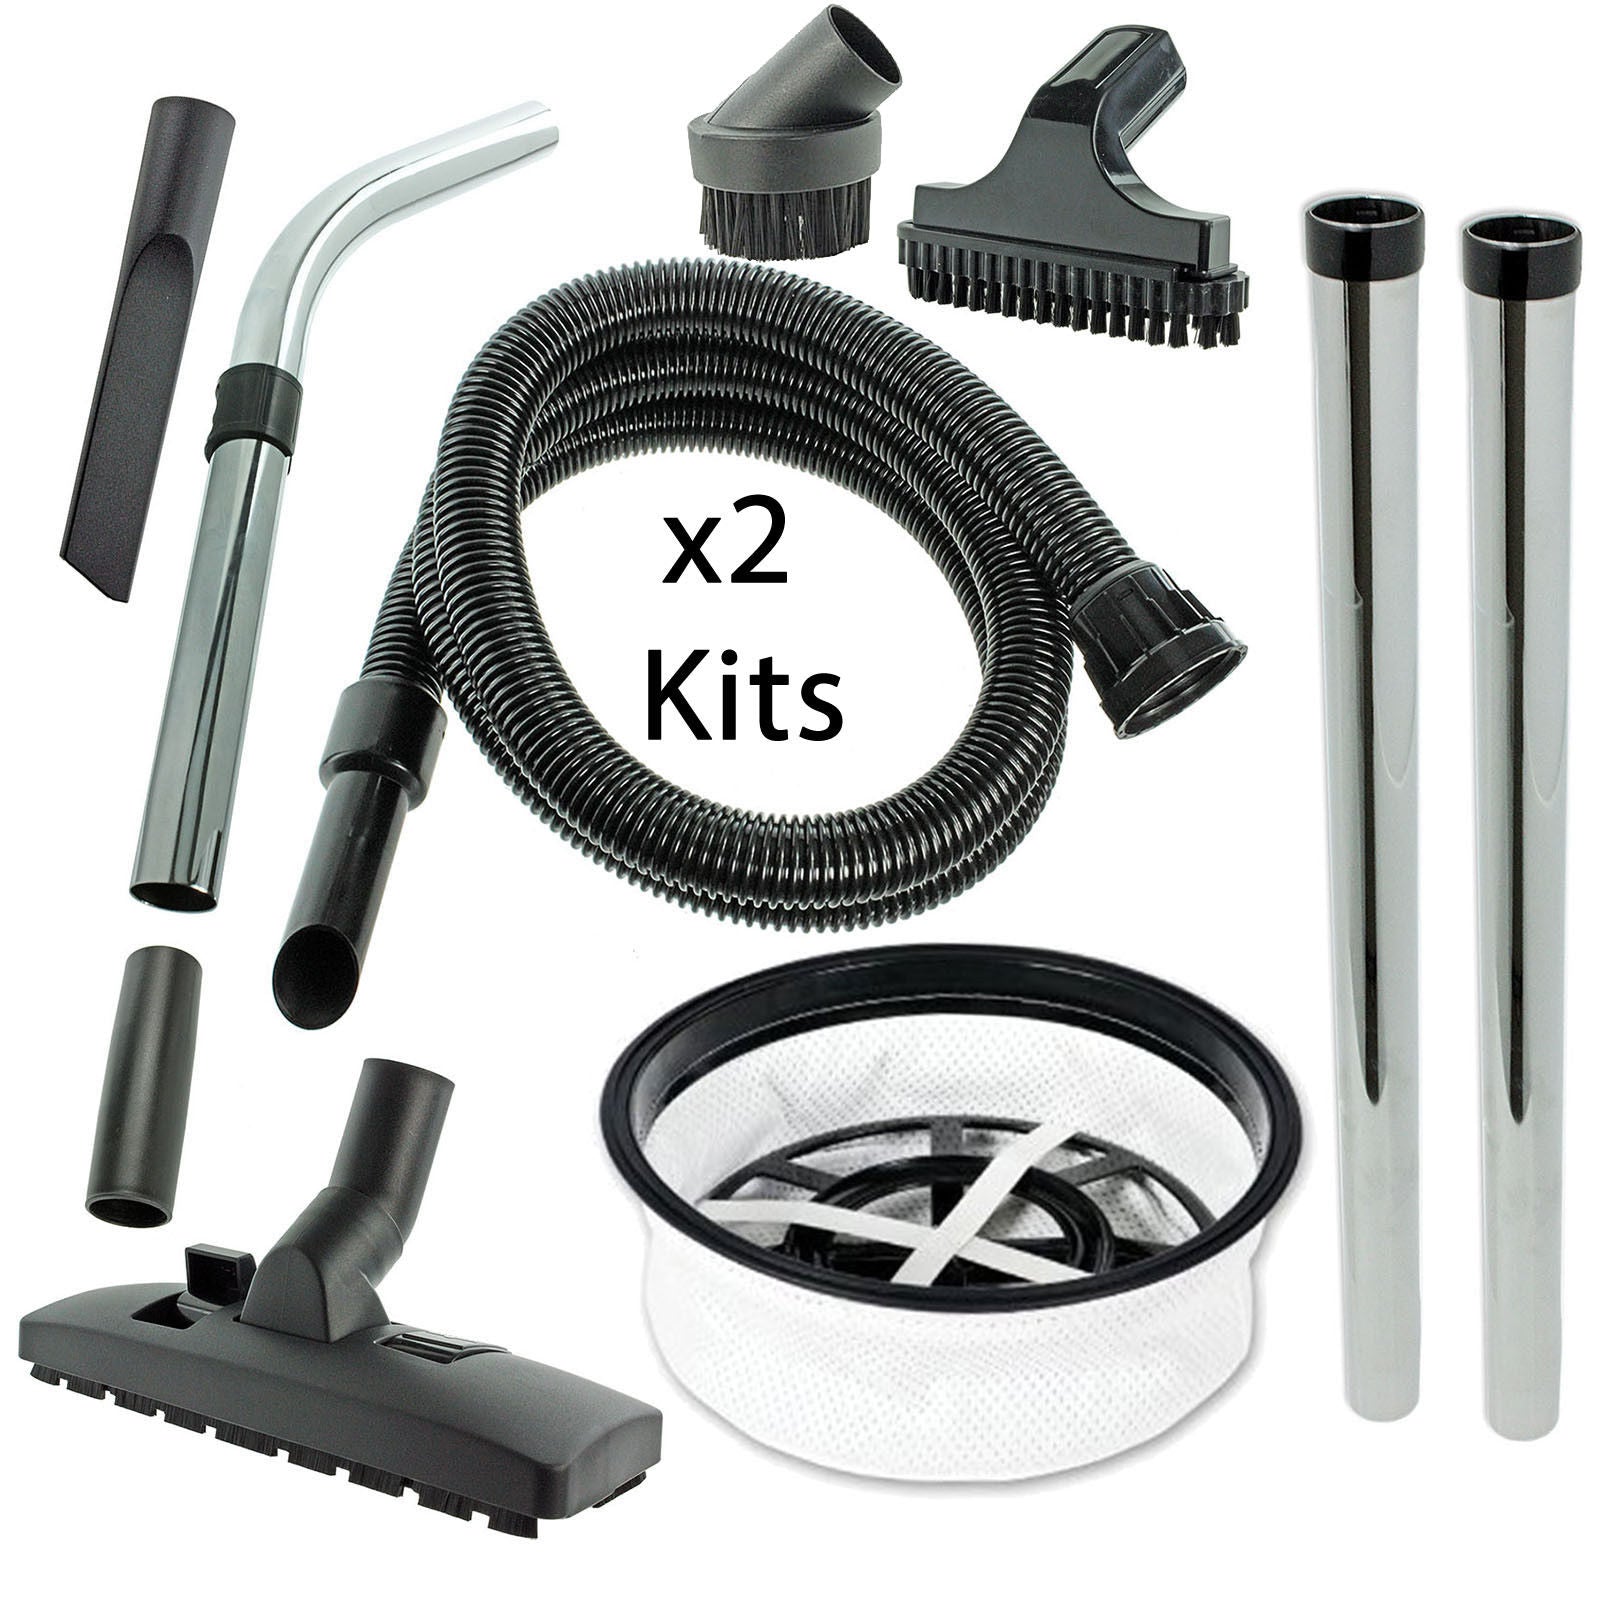 SPARES2GO Hose & Tool Kit Filter For Numatic Henry Hetty James Vacuum Cleaner Hoover (2.5m) (2 x Kits)